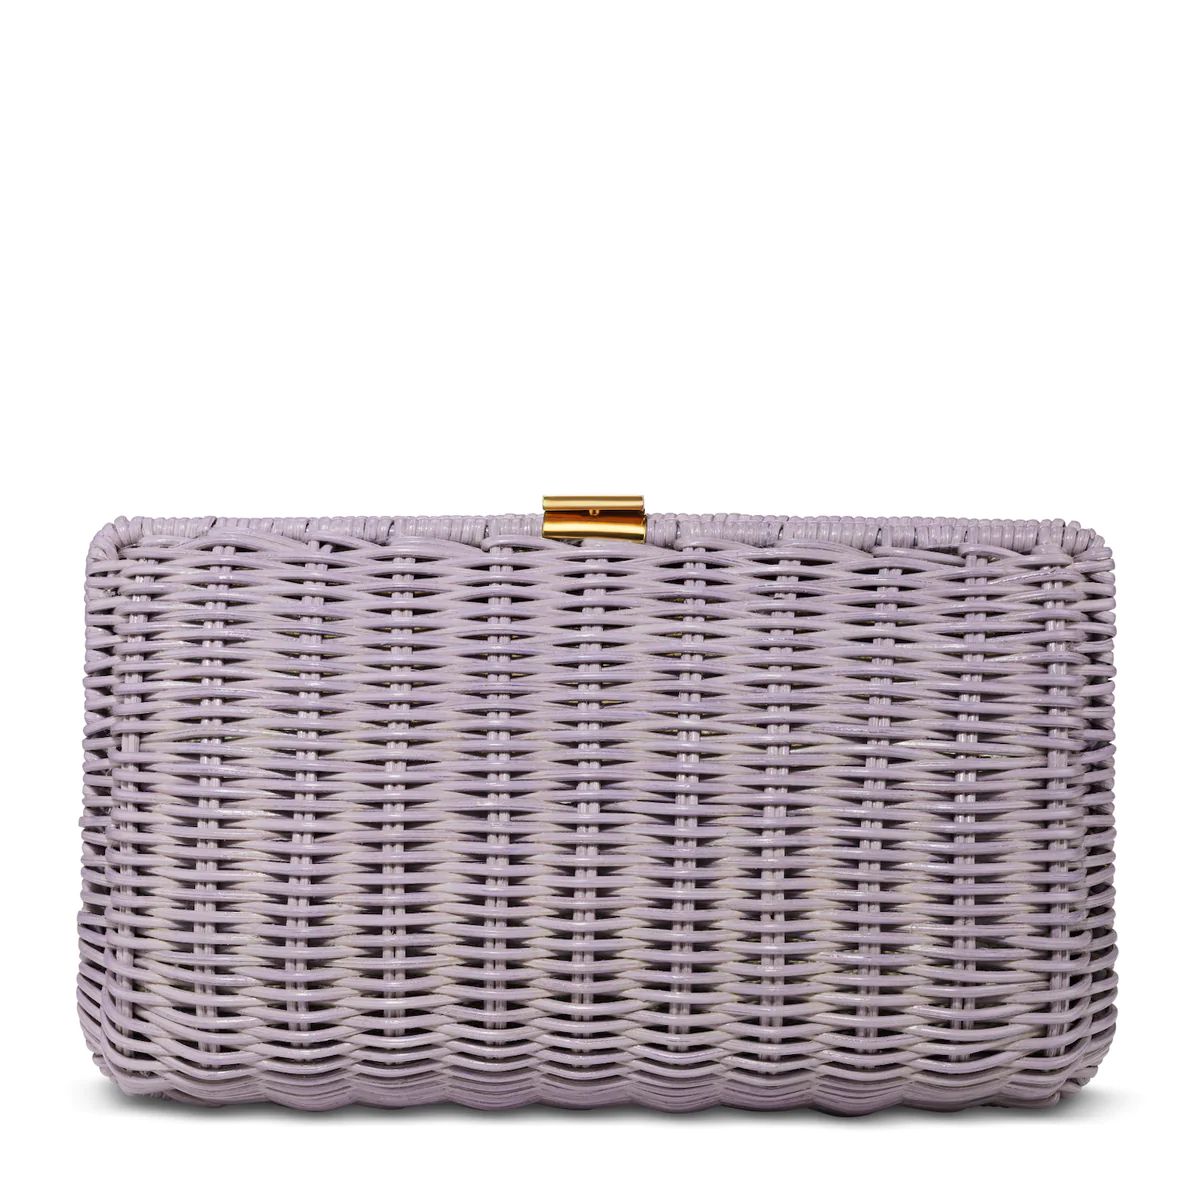 Adelina Wicker Clutch | Over The Moon